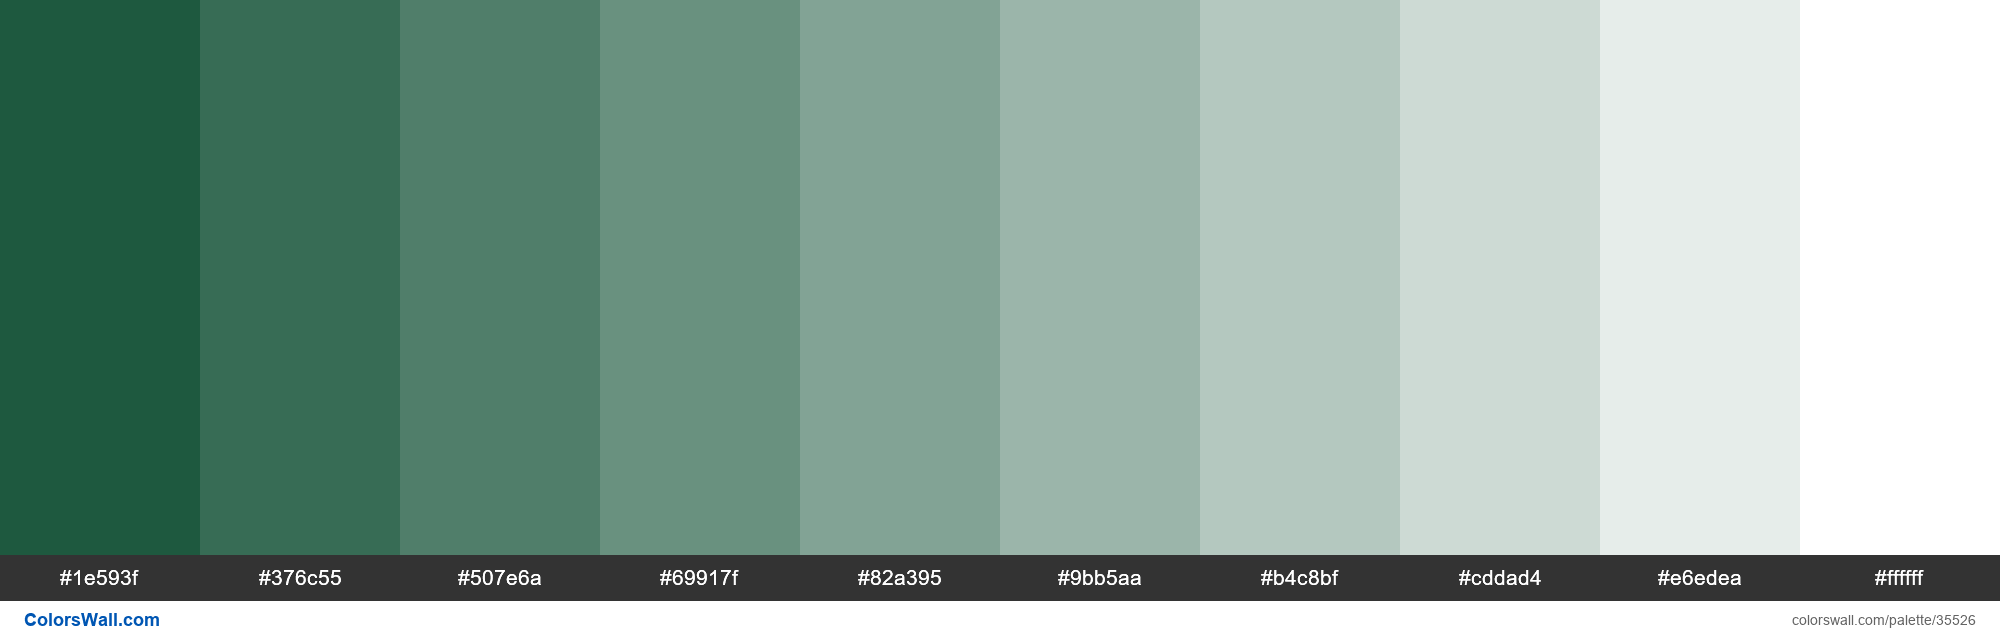 colorswall on X: Shades XKCD Color dark forest green #002d04 hex #002904,  #002403, #001f03, #001b02, #001702, #001202, #000e01, #000901, #000400,  #000000 #colors #palette   /  X